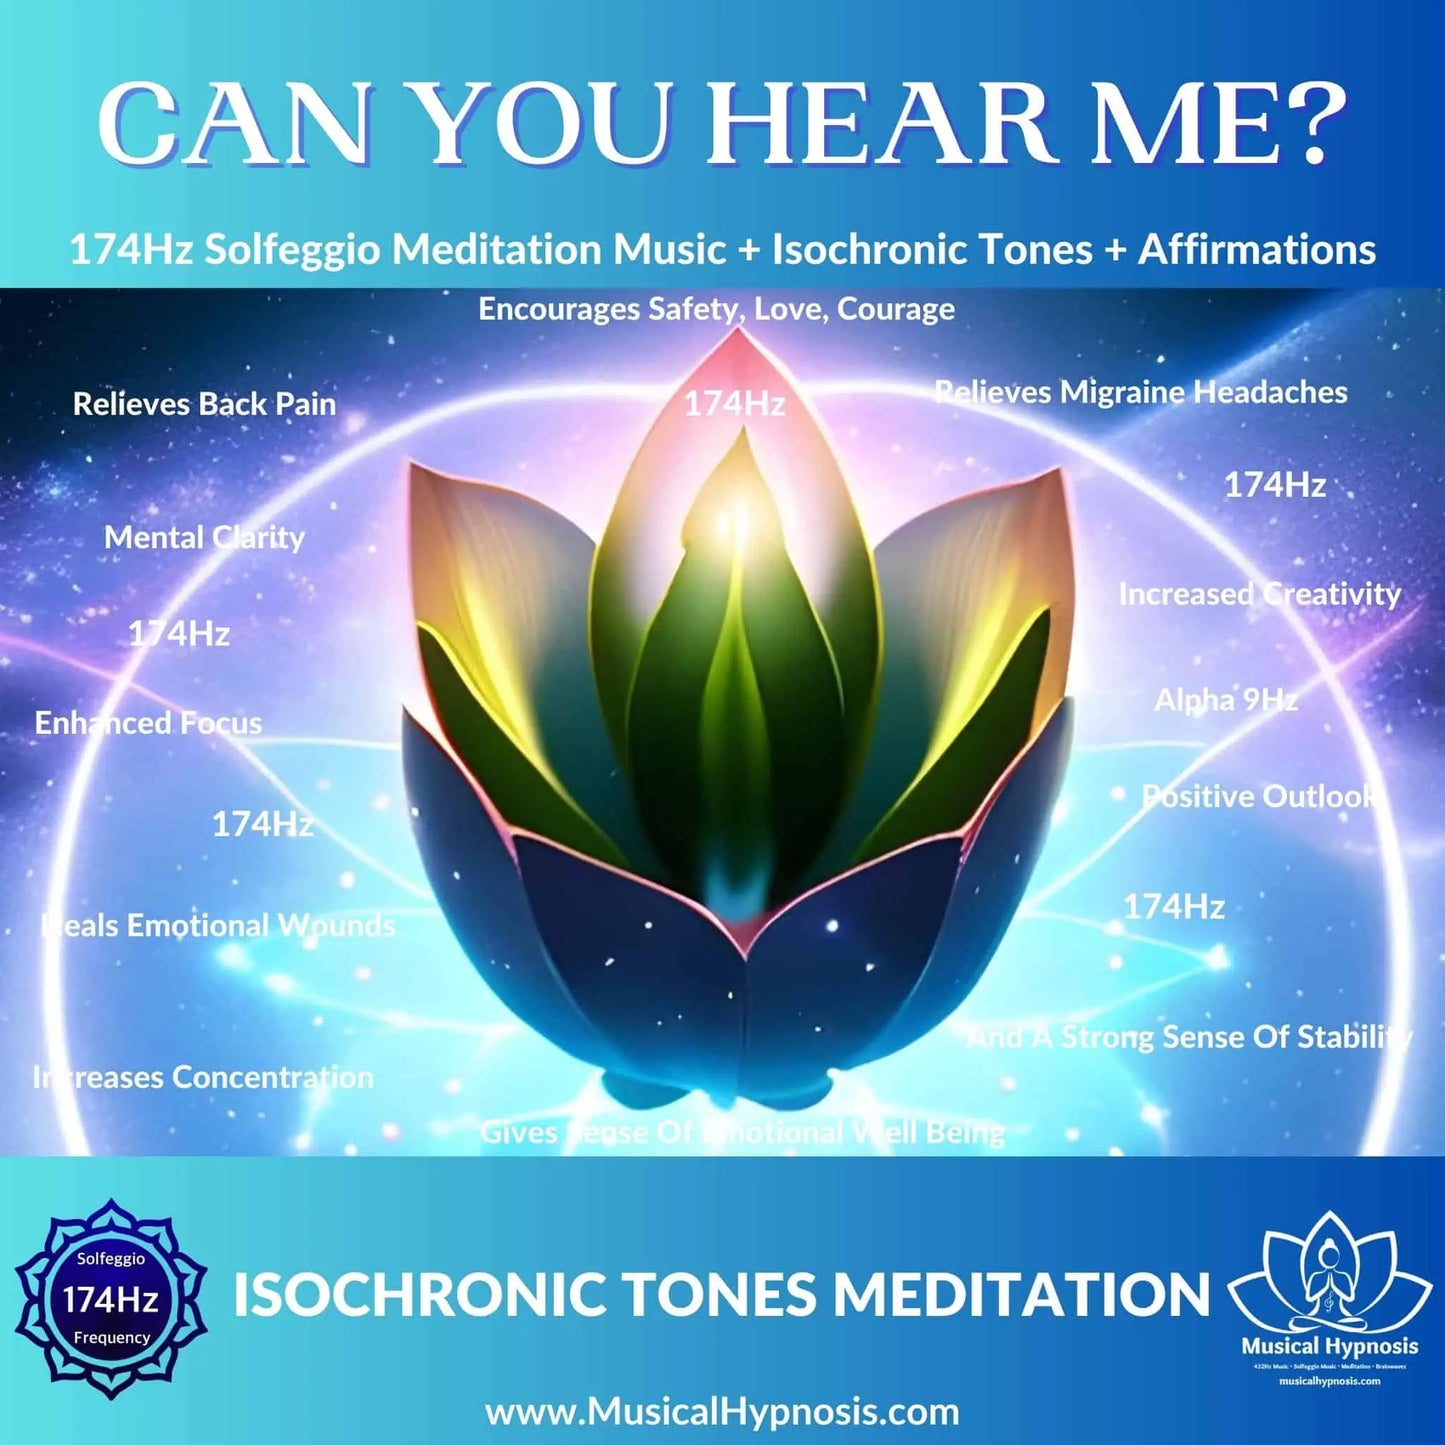 Can You Hear Me? • 174Hz Isochronic Tones Meditation + Affirmations